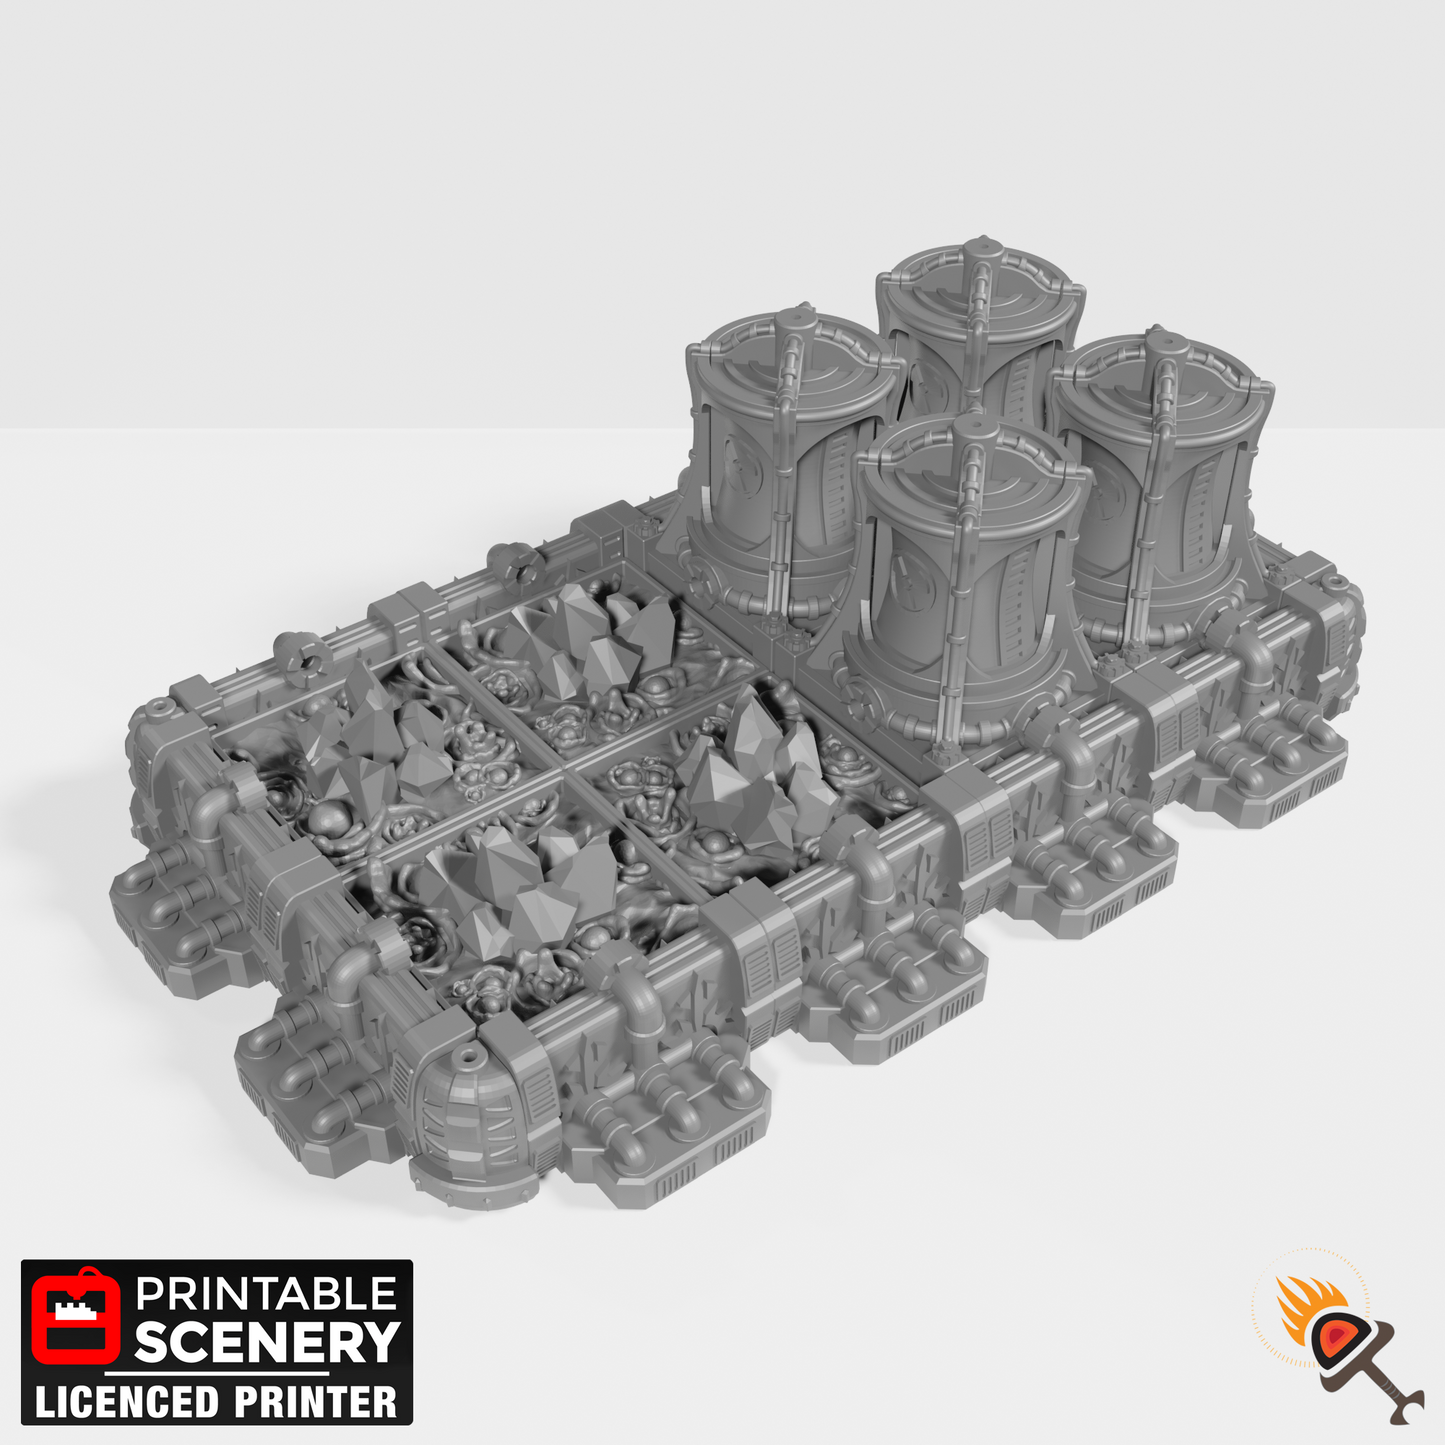 Sithic Plasma 28mm 32mm for Warhammer 40k Terrain, Sithic Outpost Smelter Wargaming Military Base, Star Wars Legion